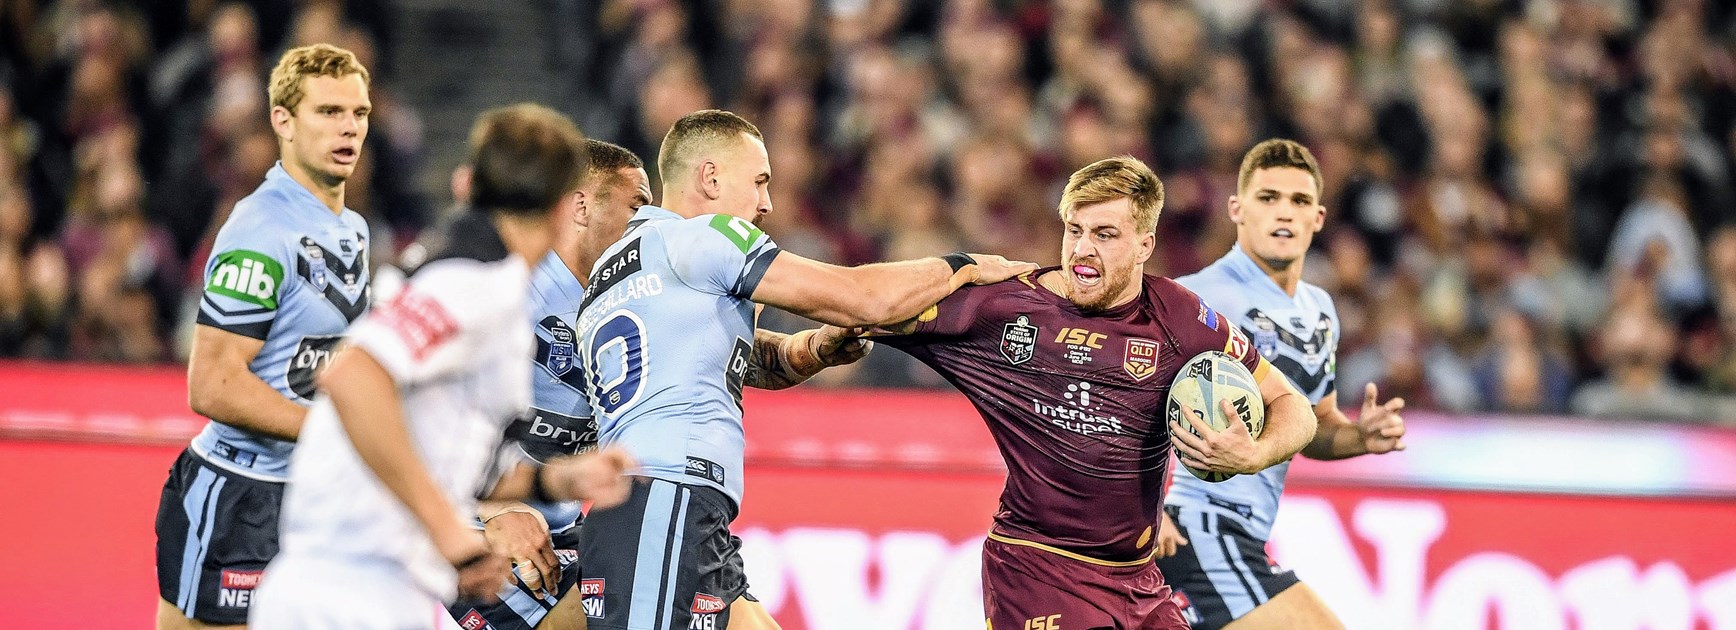 By the numbers: How the Maroons performed